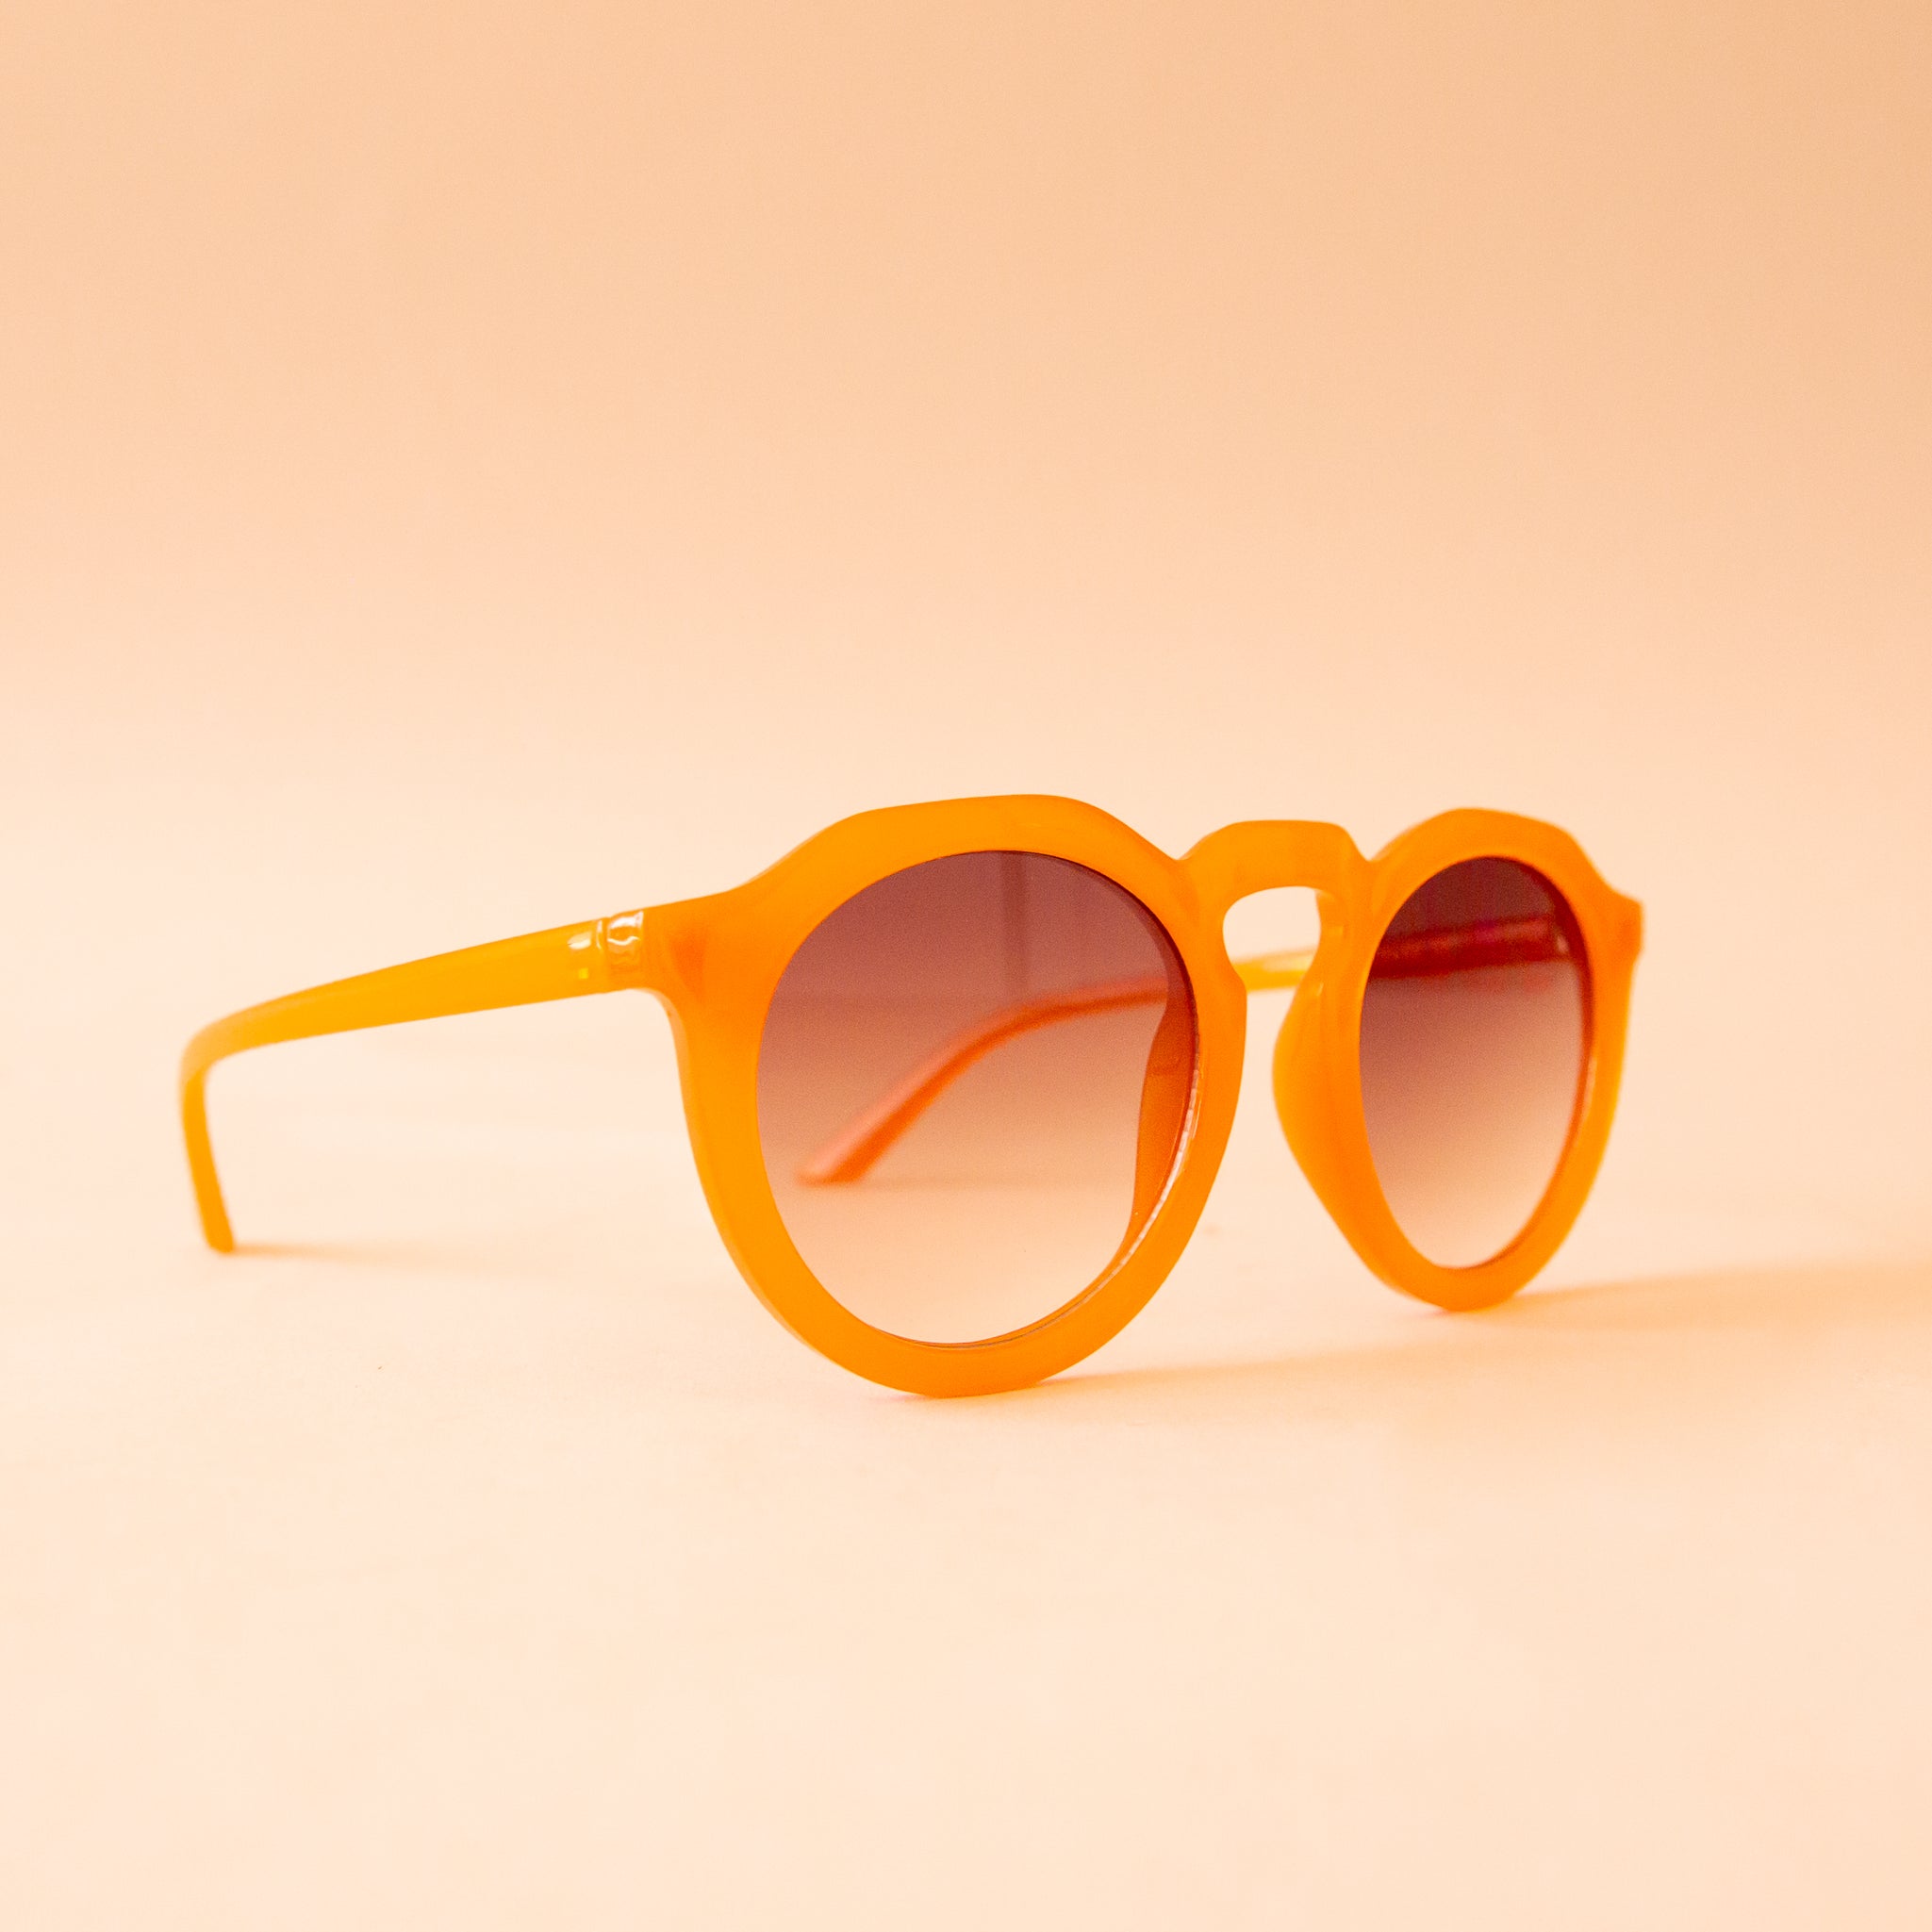 A pair of orange round sunglasses with a brown gradient lens.